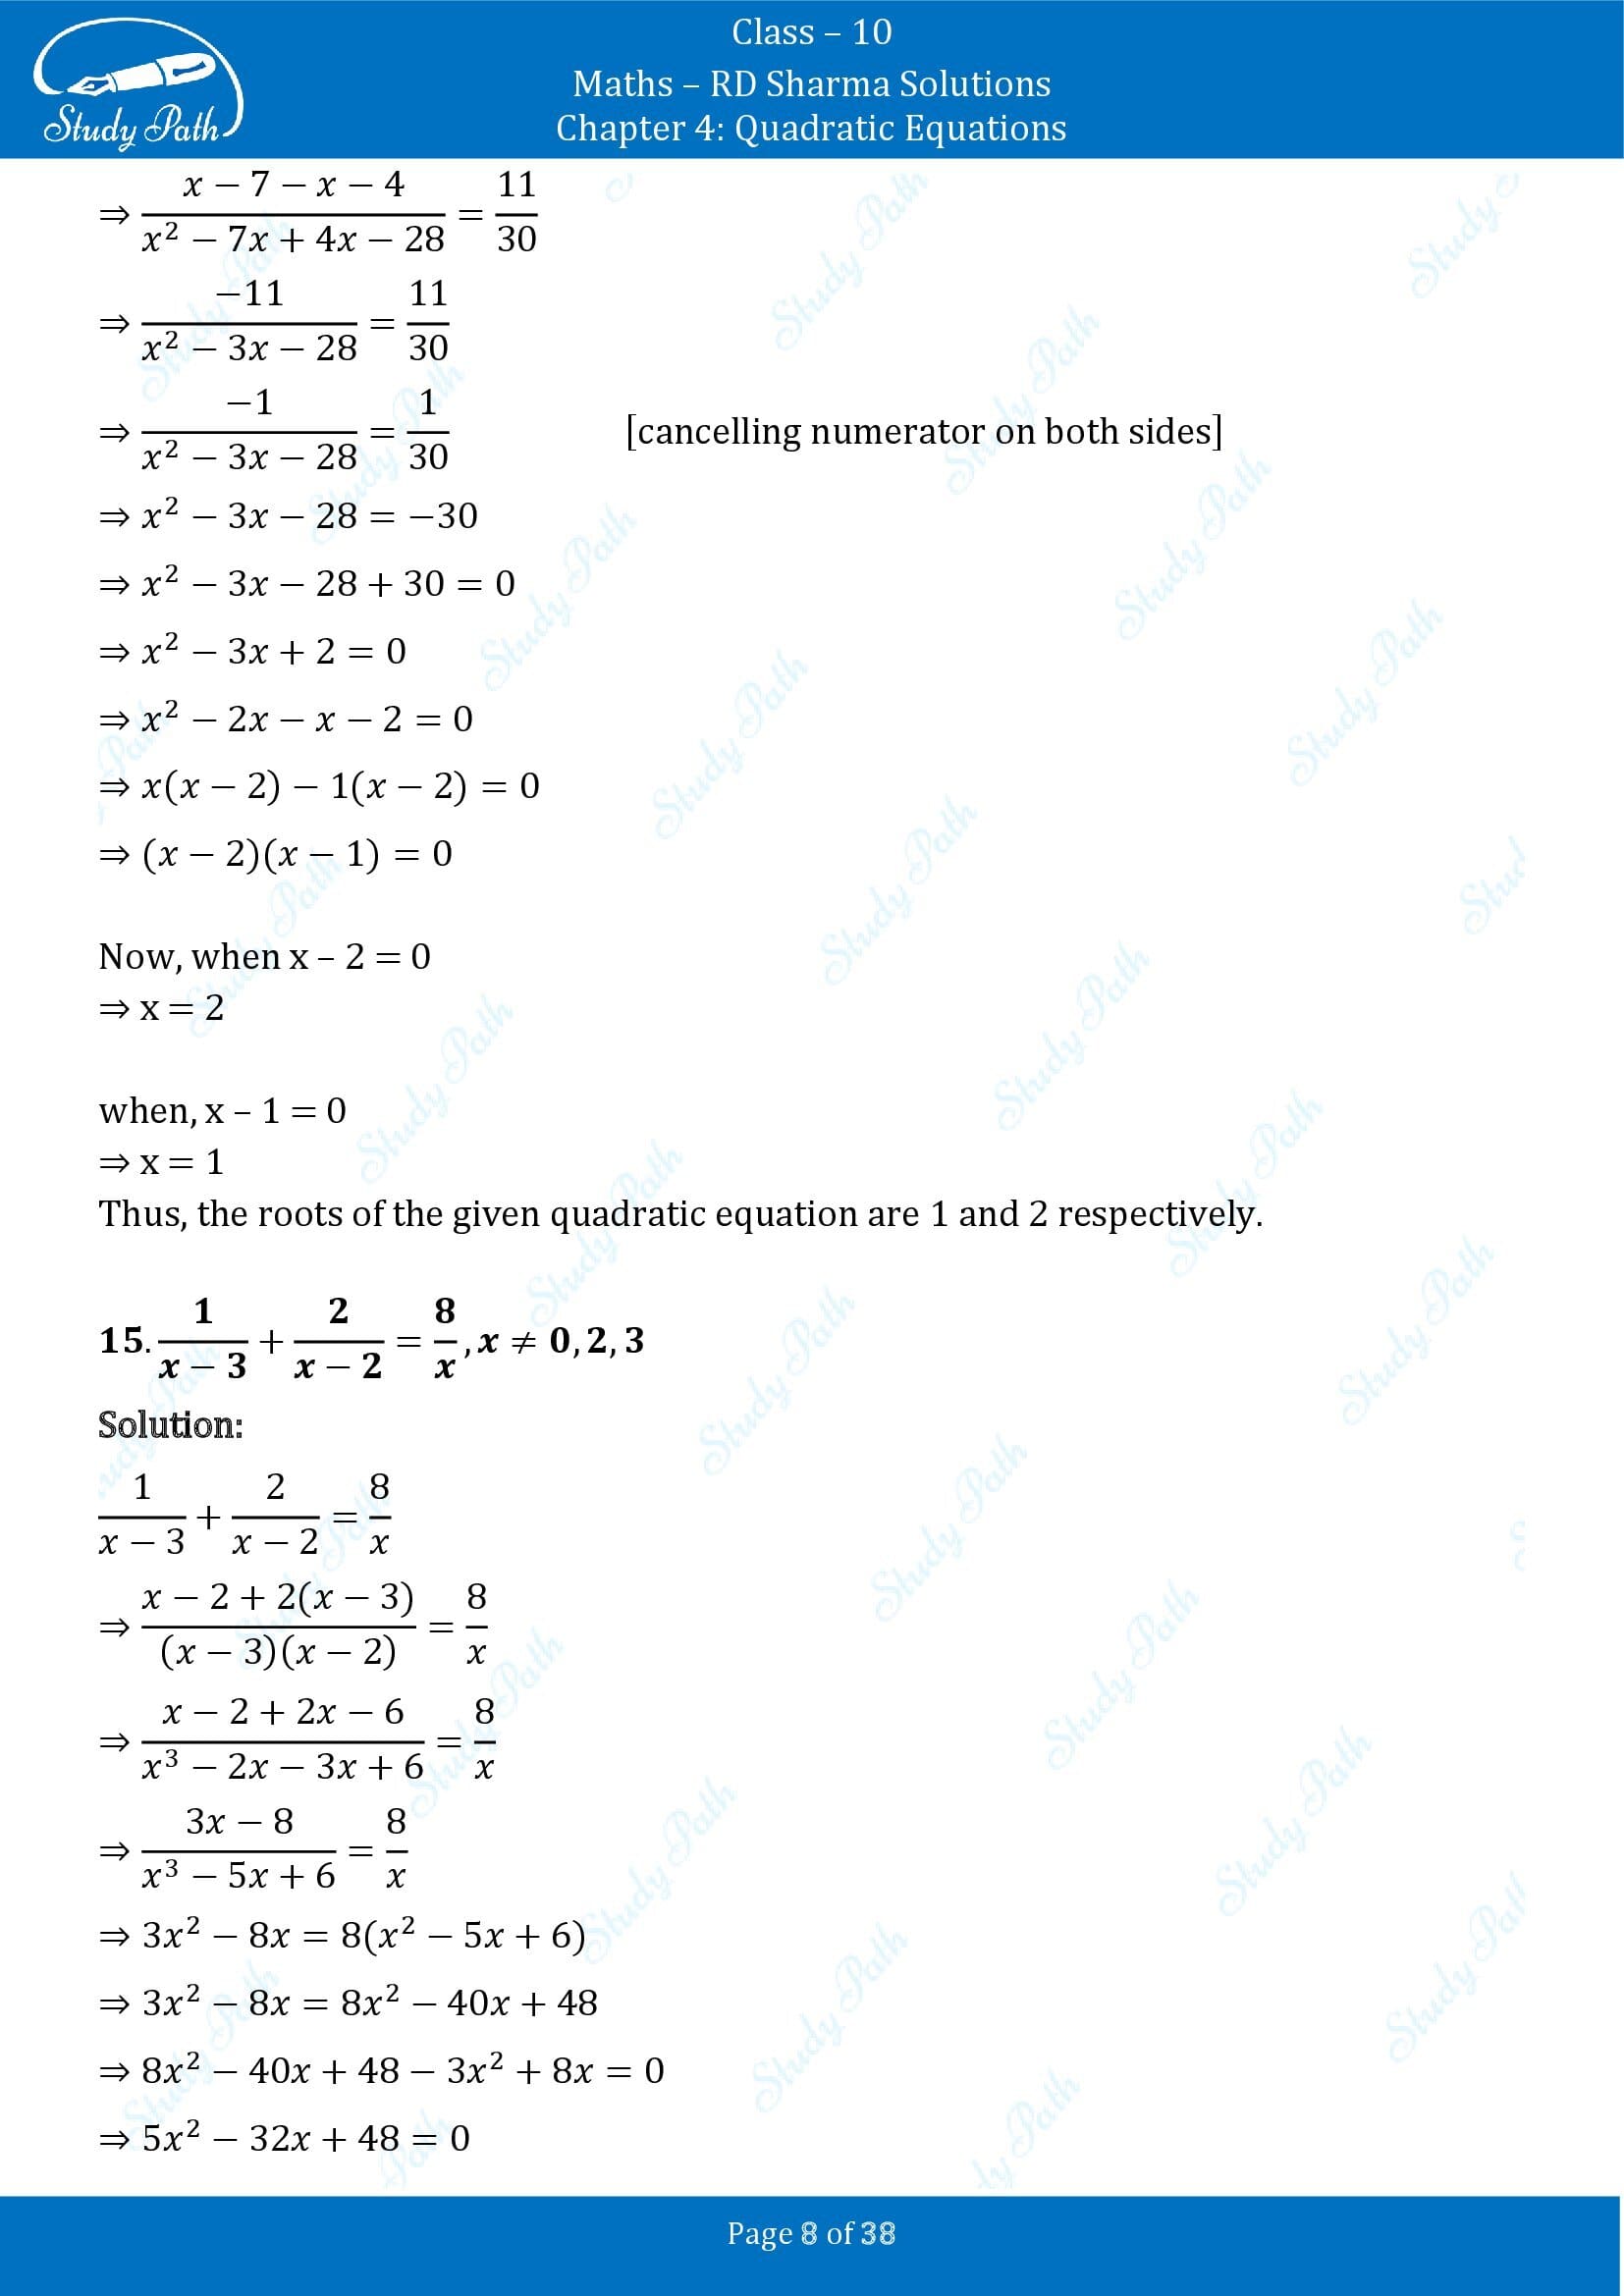 RD Sharma Solutions Class 10 Chapter 4 Quadratic Equations Exercise 4.3 00008